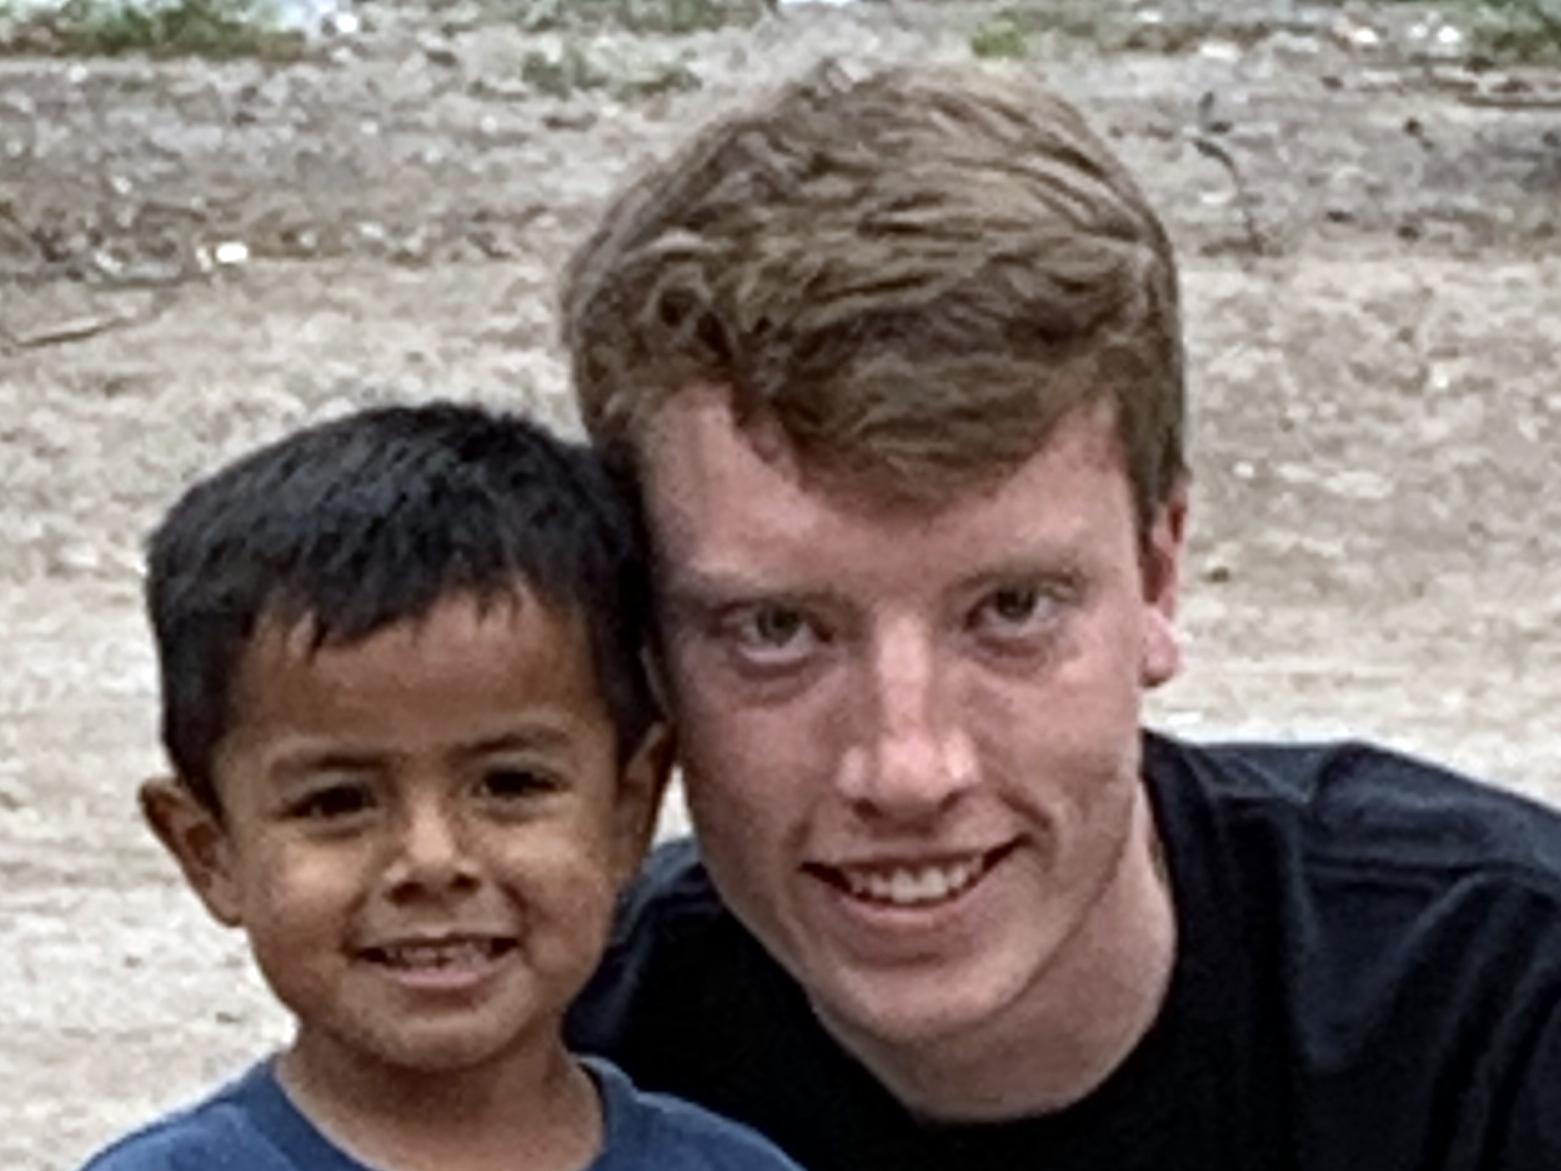 Ben Gibson and a new friend during service immersion trip